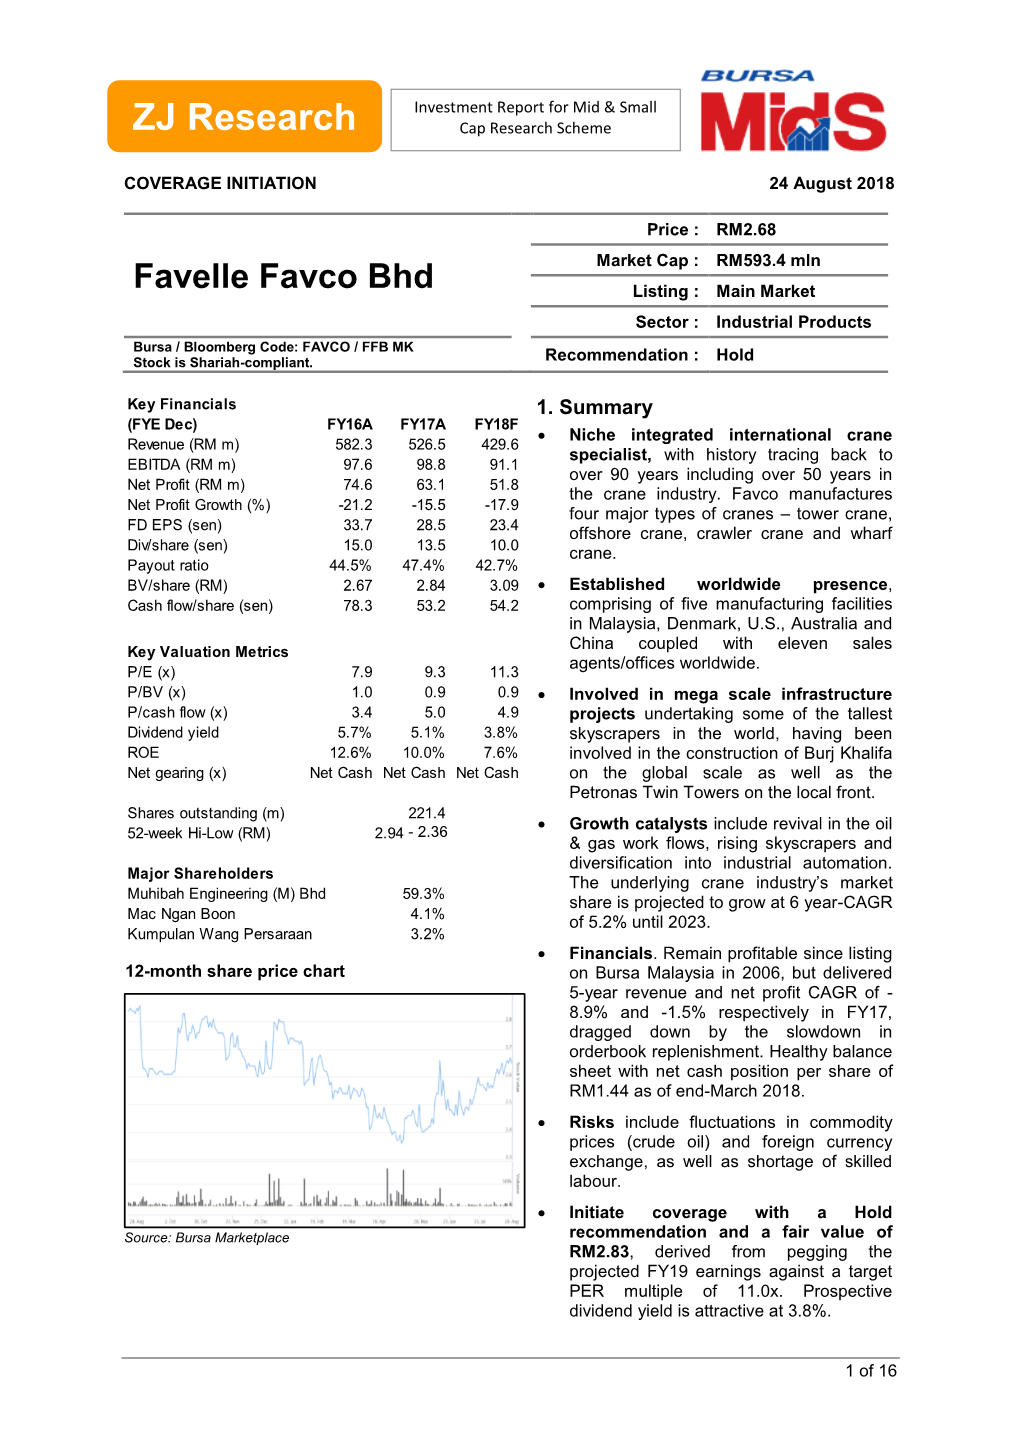 Favelle Favco Bhd Listing : Main Market Sector : Industrial Products Bursa / Bloomberg Code: FAVCO / FFB MK Stock Is Shariah-Compliant